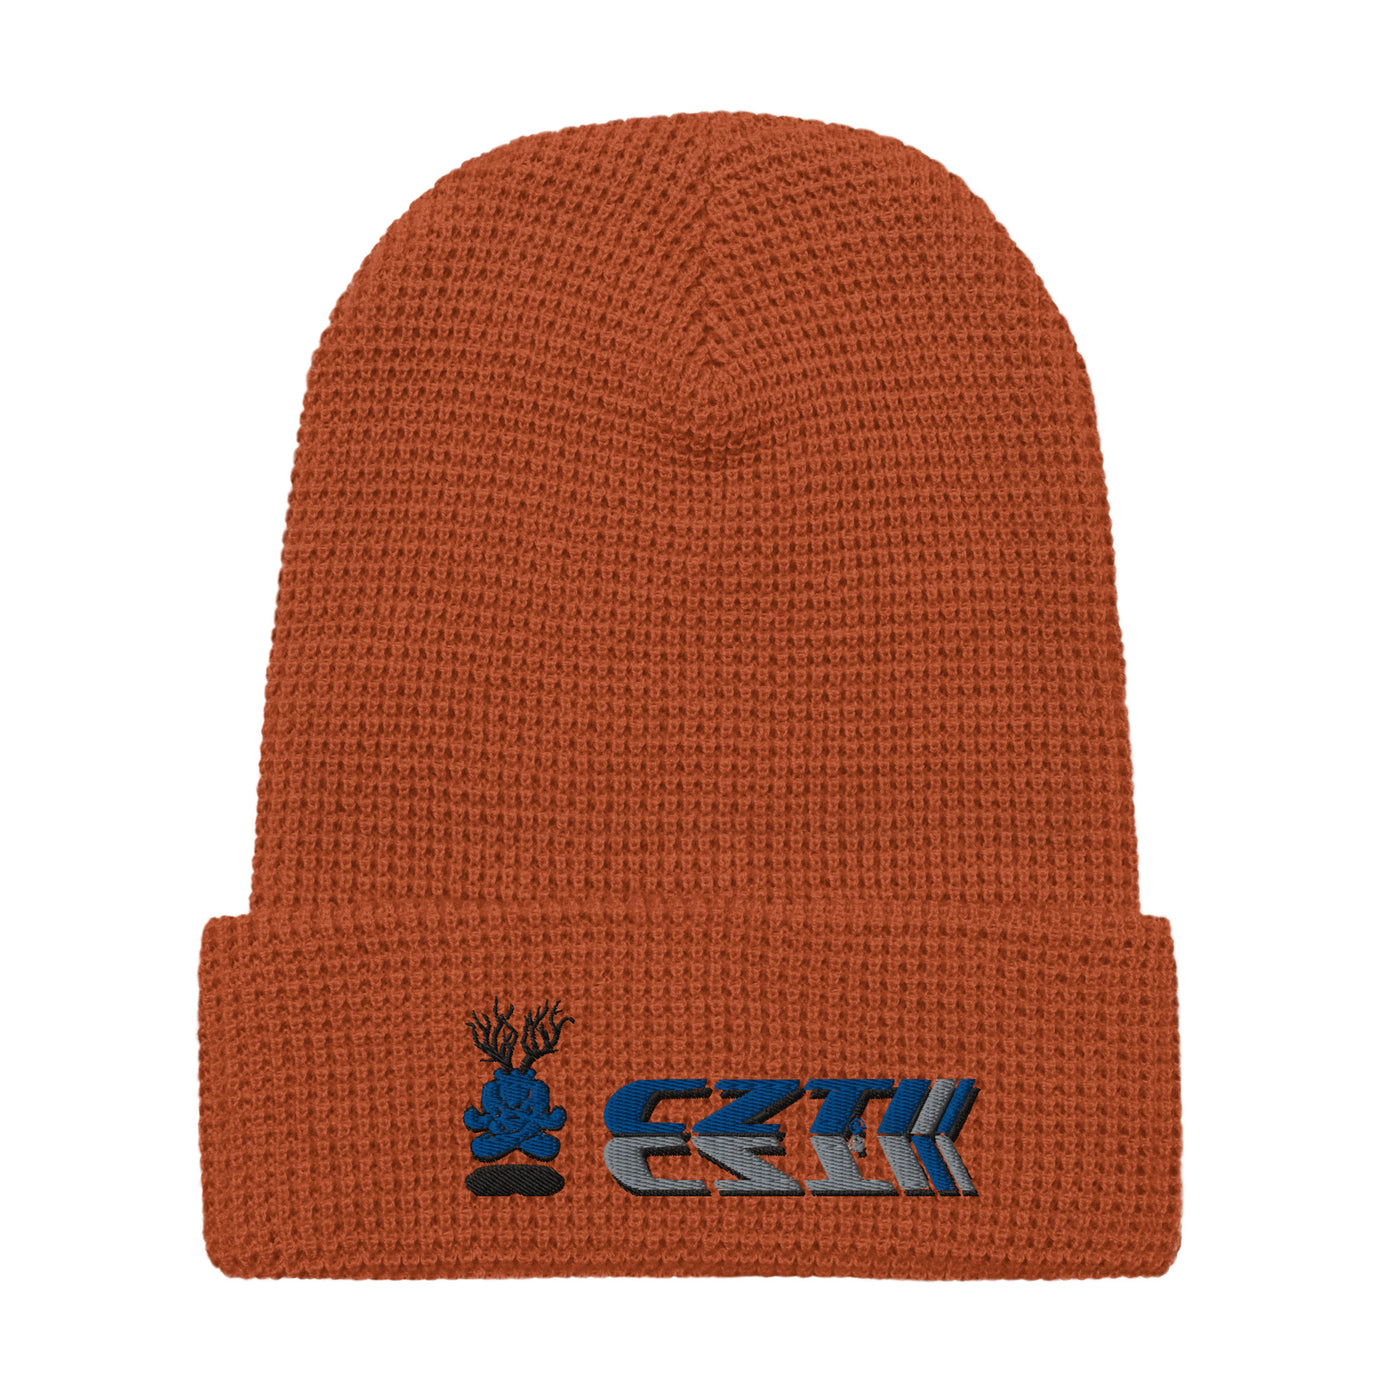 CZT Embroidered BBB Mascot Waffle Beanie